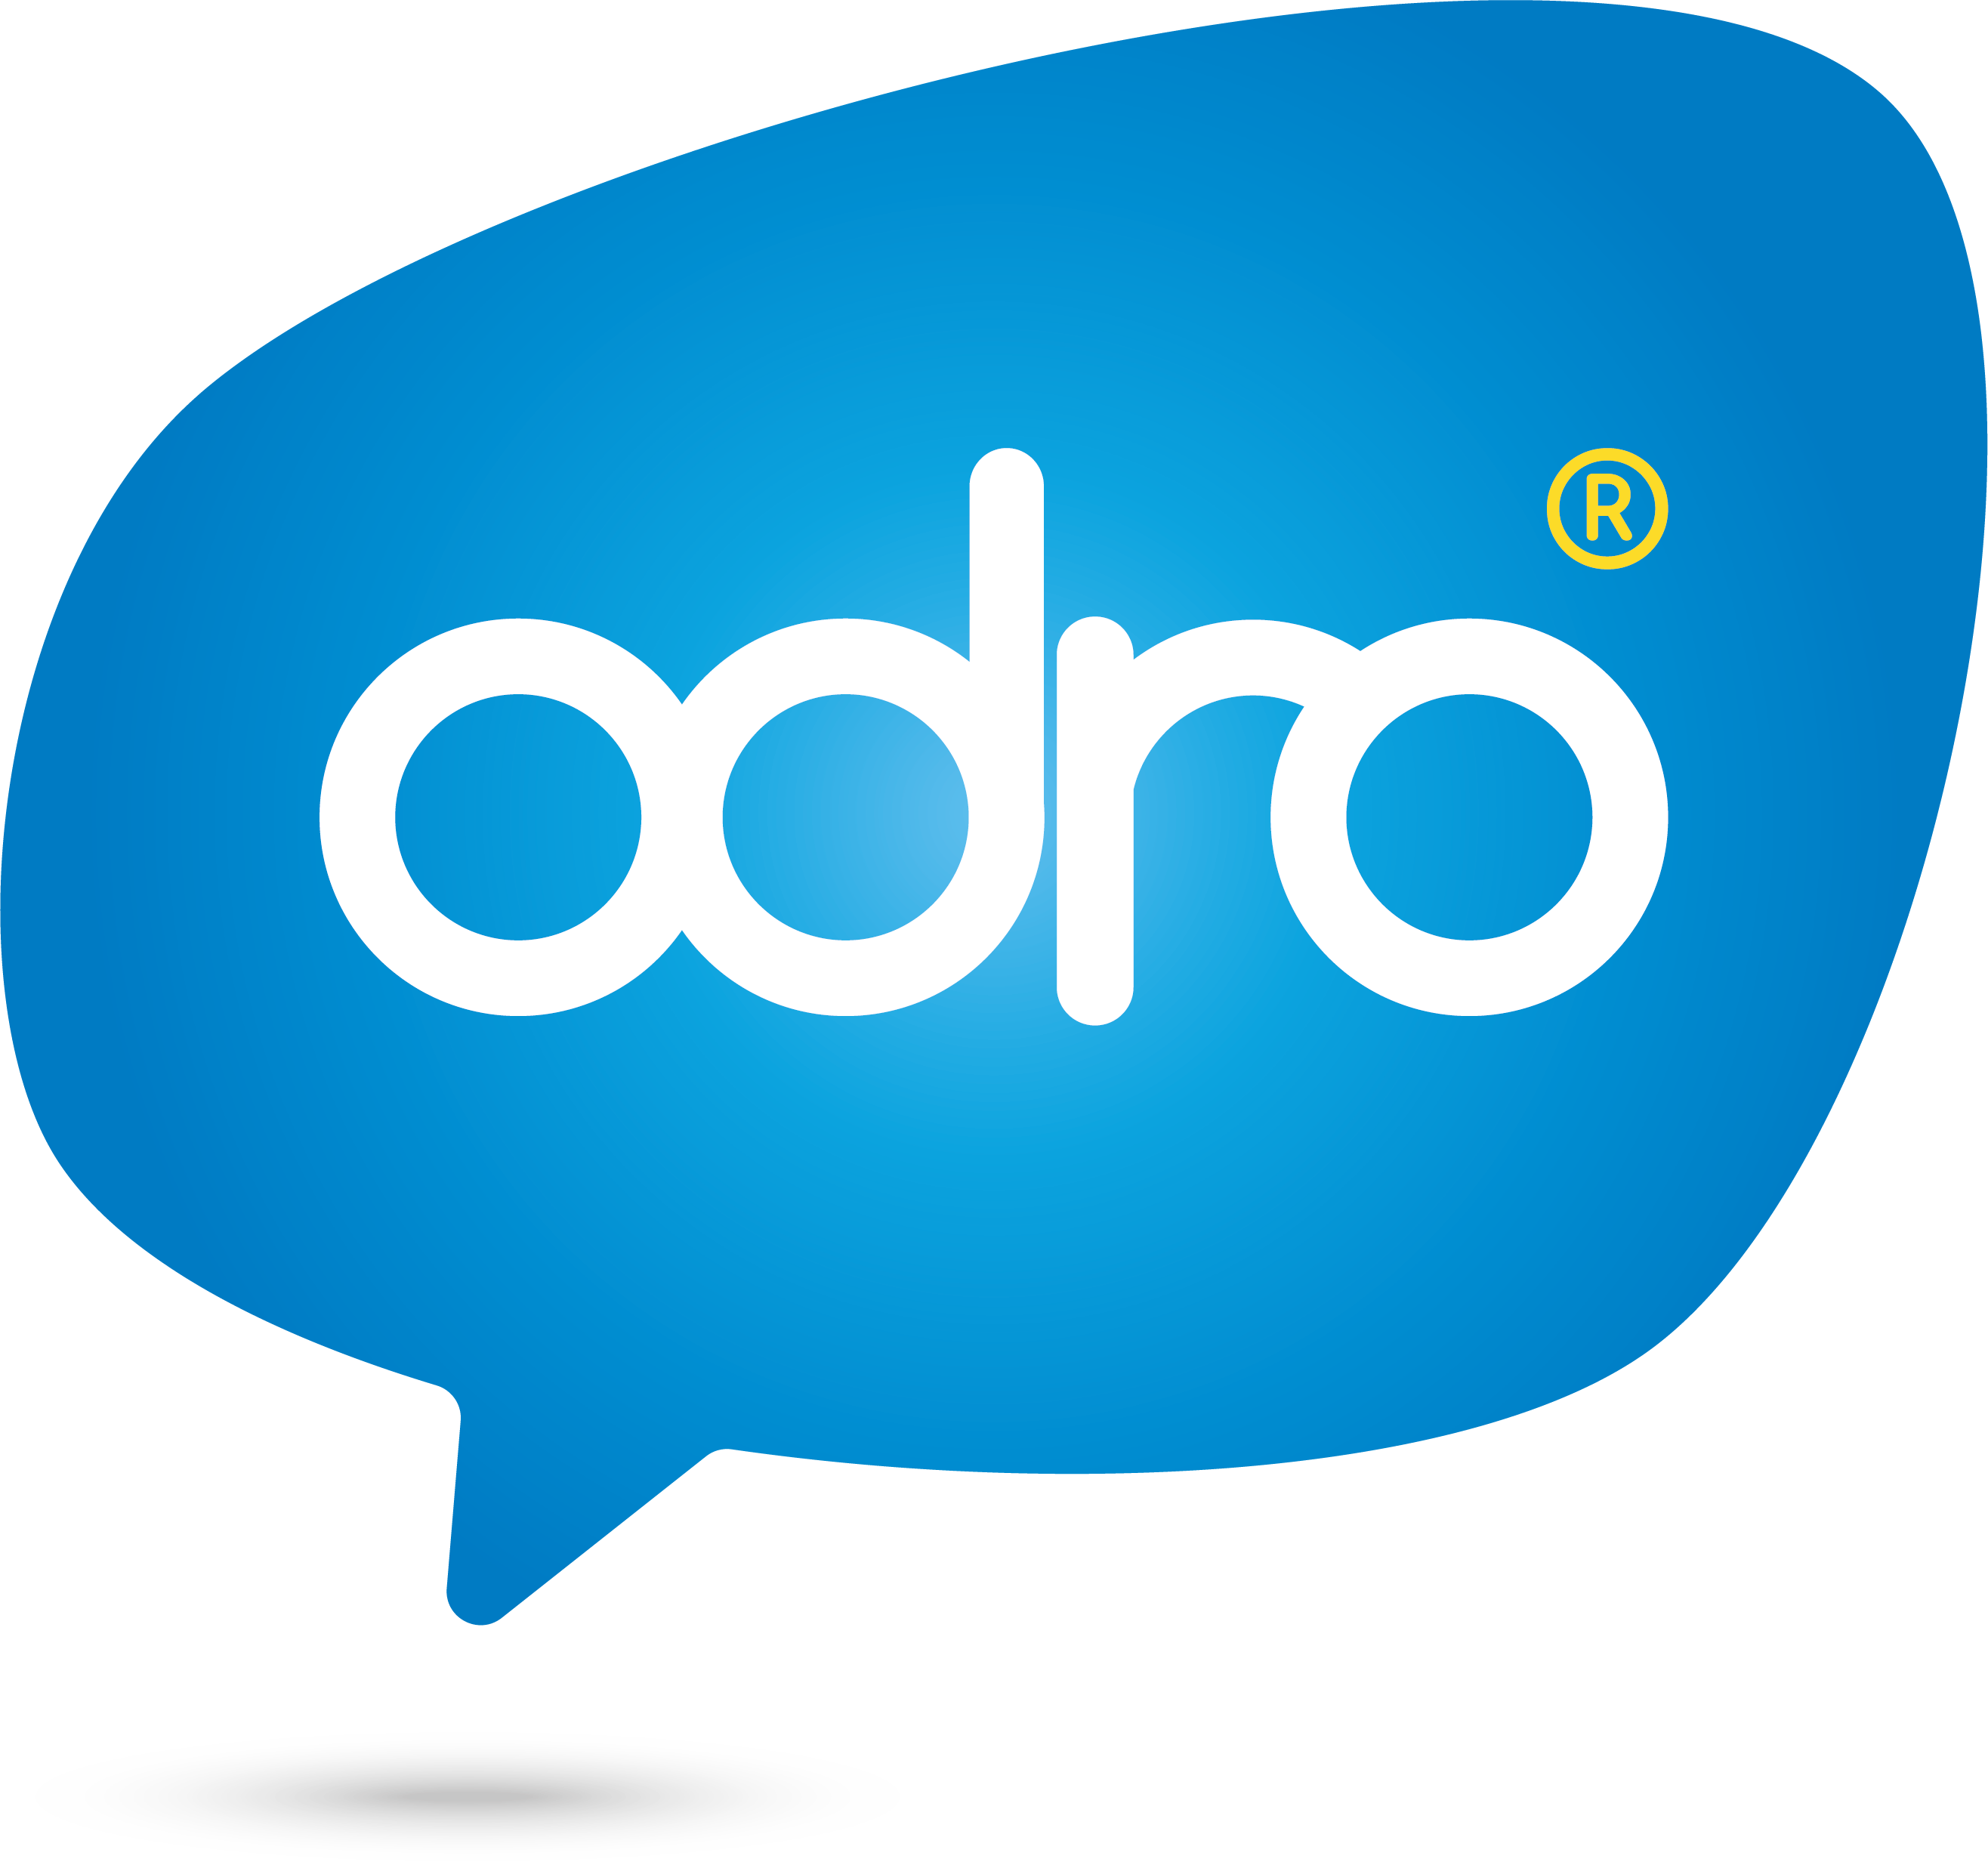 Odro - Video Interviewing Software